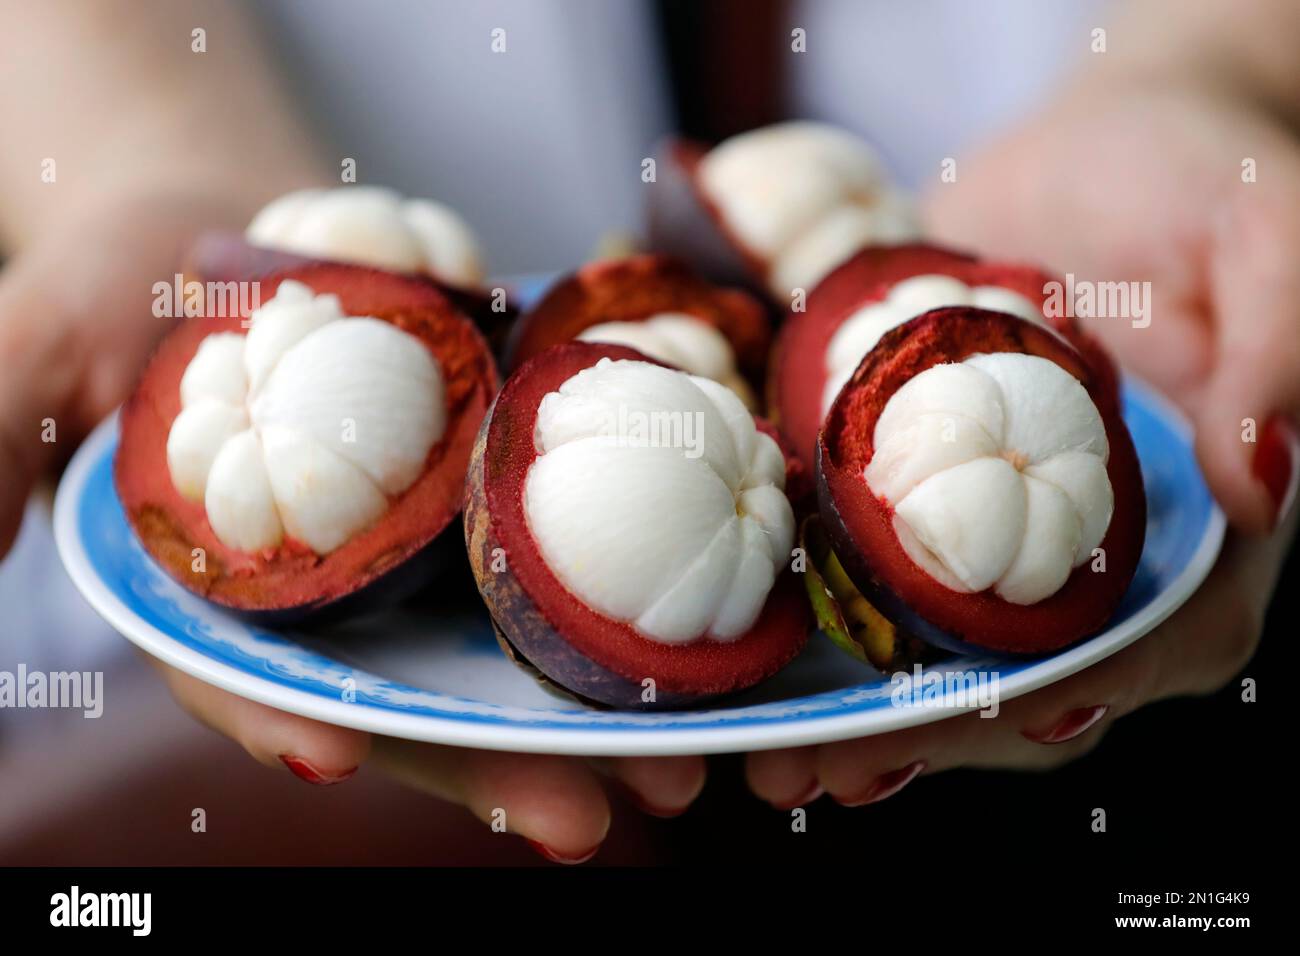 Mangosteen fruit split on a plate, tropical fruit with sweet juicy white segments, Vietnam, Indochina, Southeast Asia, Asia Stock Photo